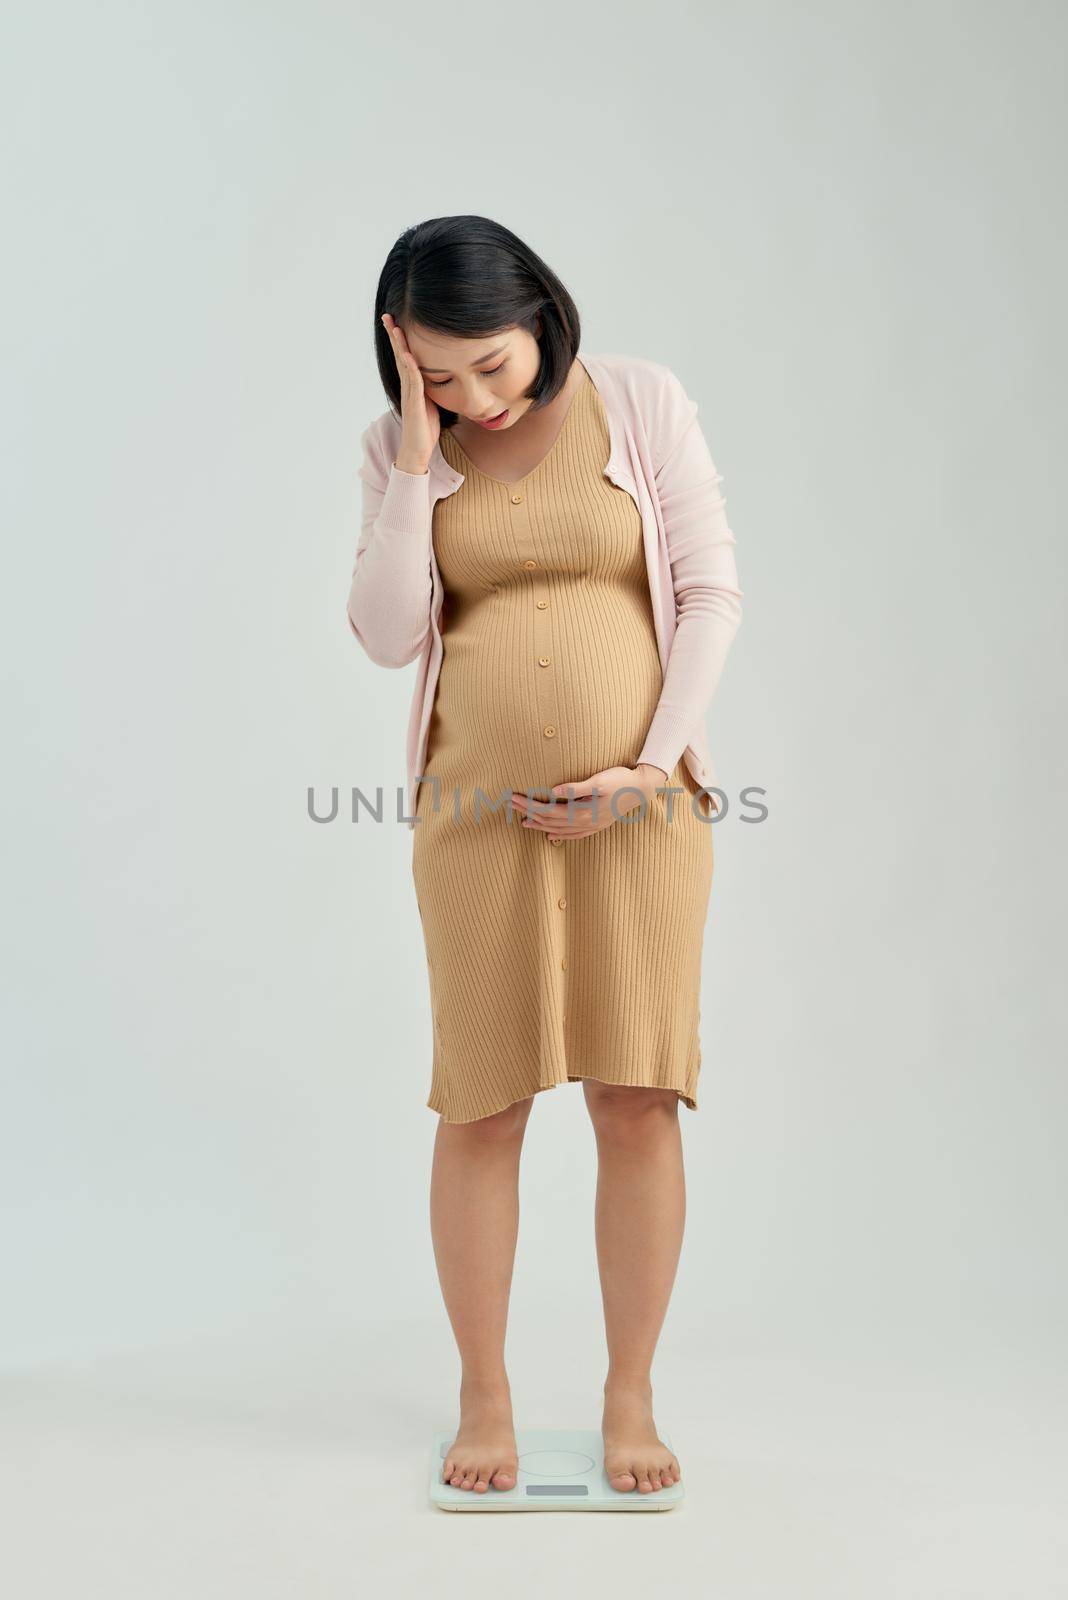 Pregnant woman standing on scales at home. Pregnancy weight gain concept by makidotvn